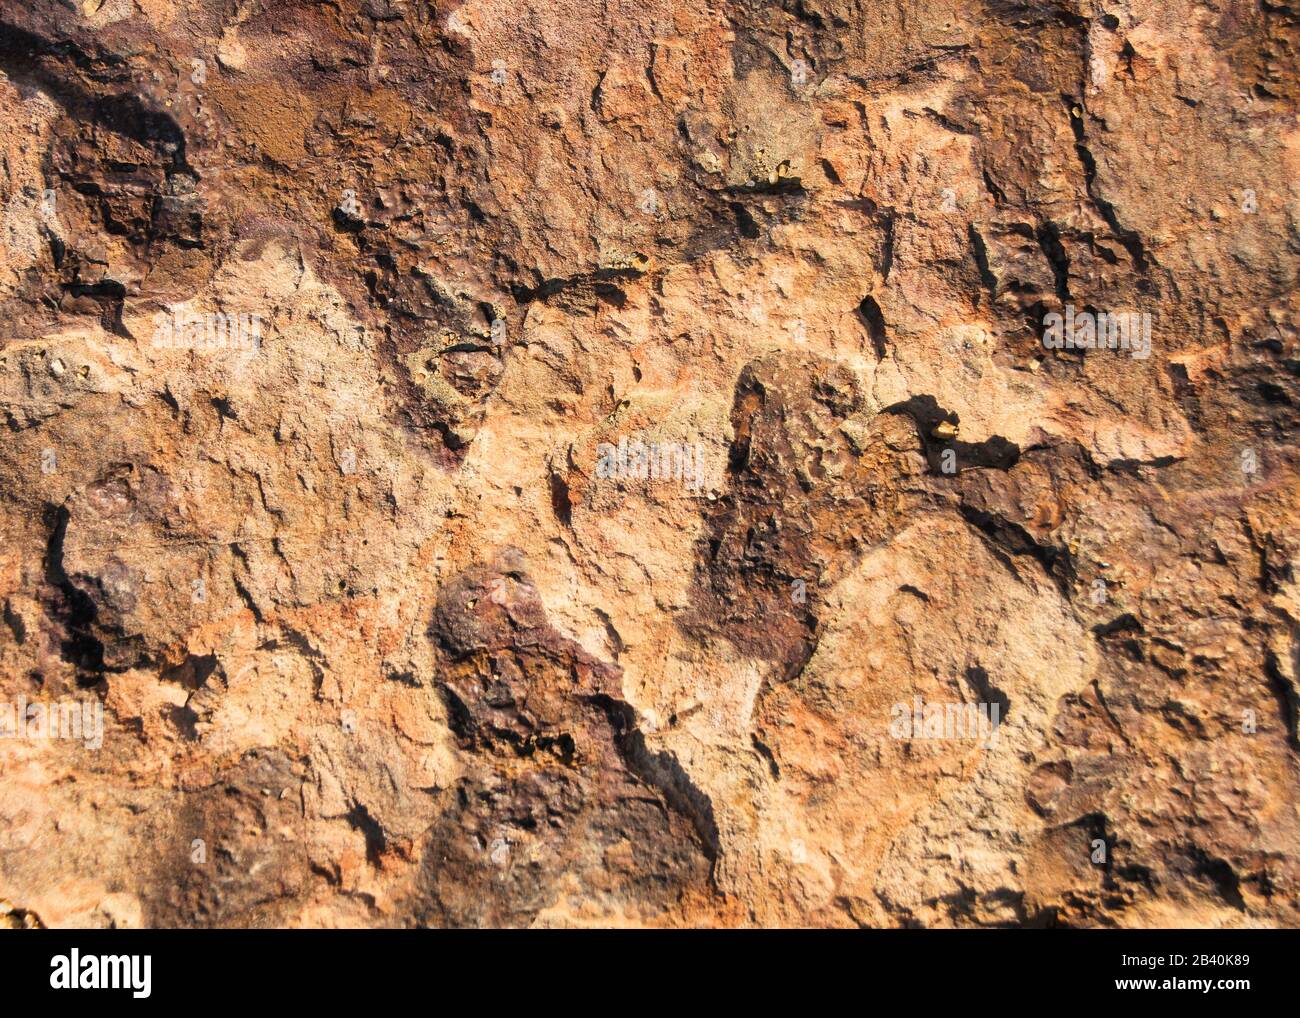 A close up view of rough hewn and peeling red brown rock. Stock Photo